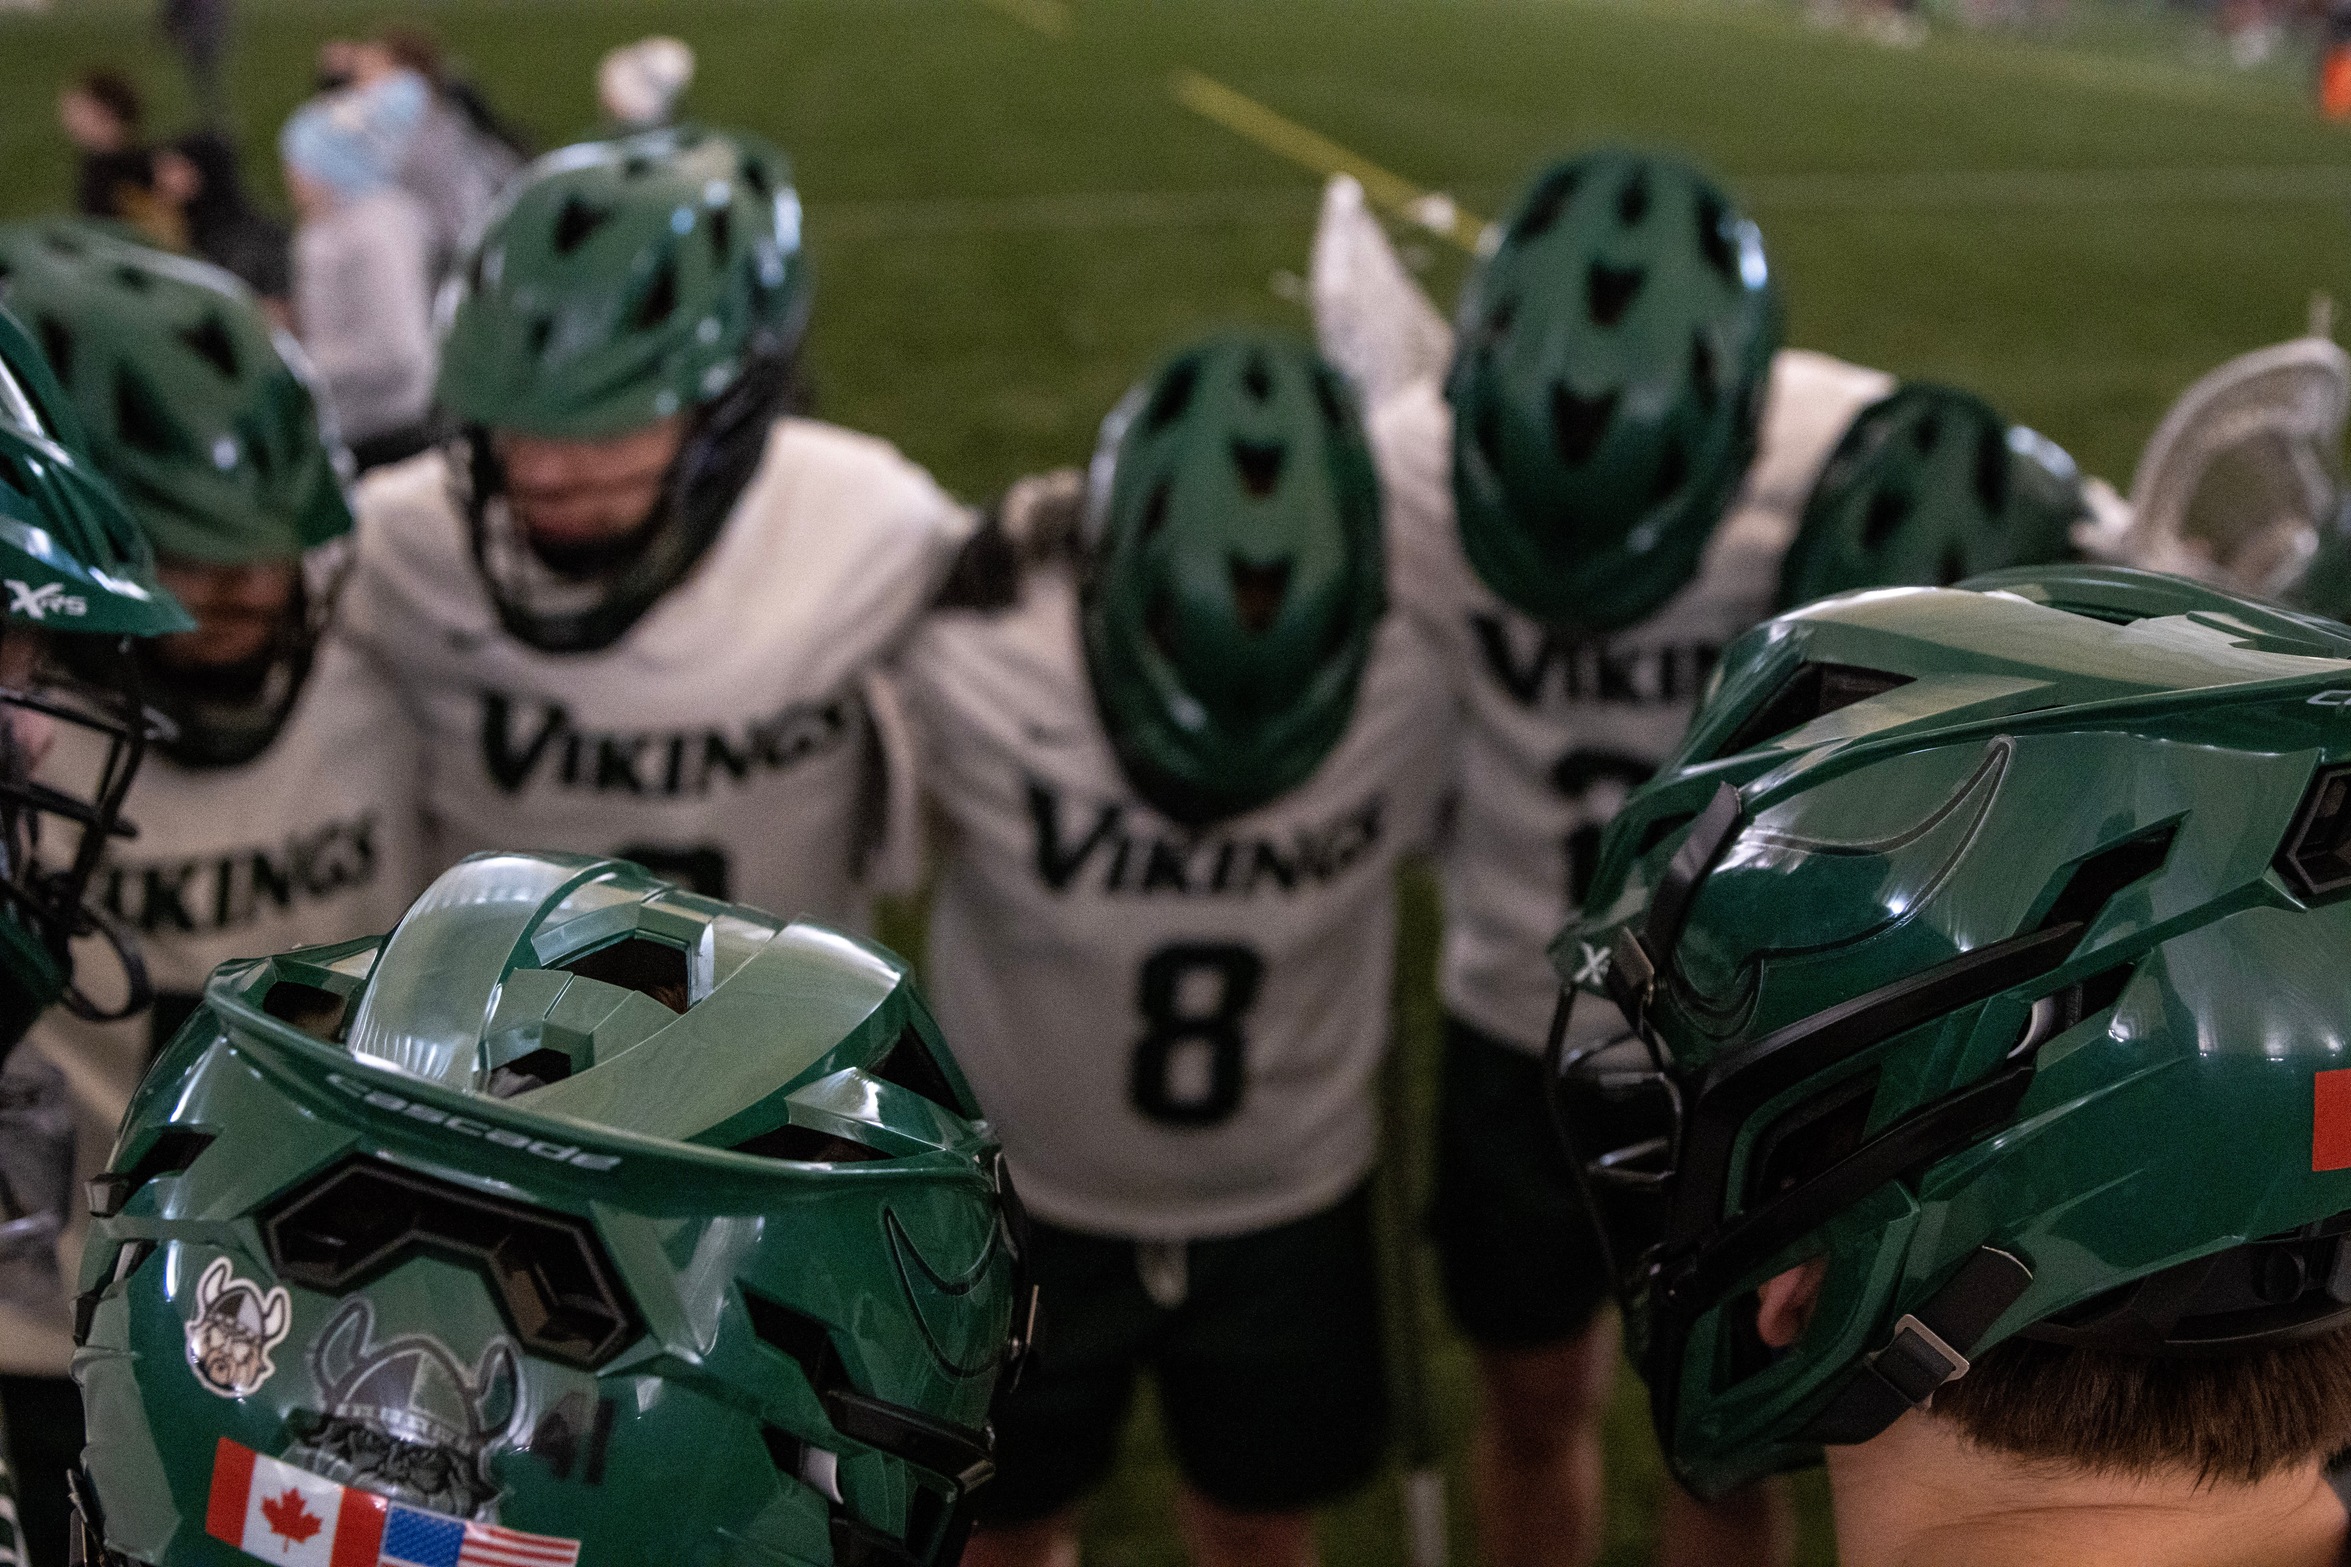 Cleveland State Lacrosse Drops a Hard-Fought Battle to No. 10 Jacksonville, 14-12